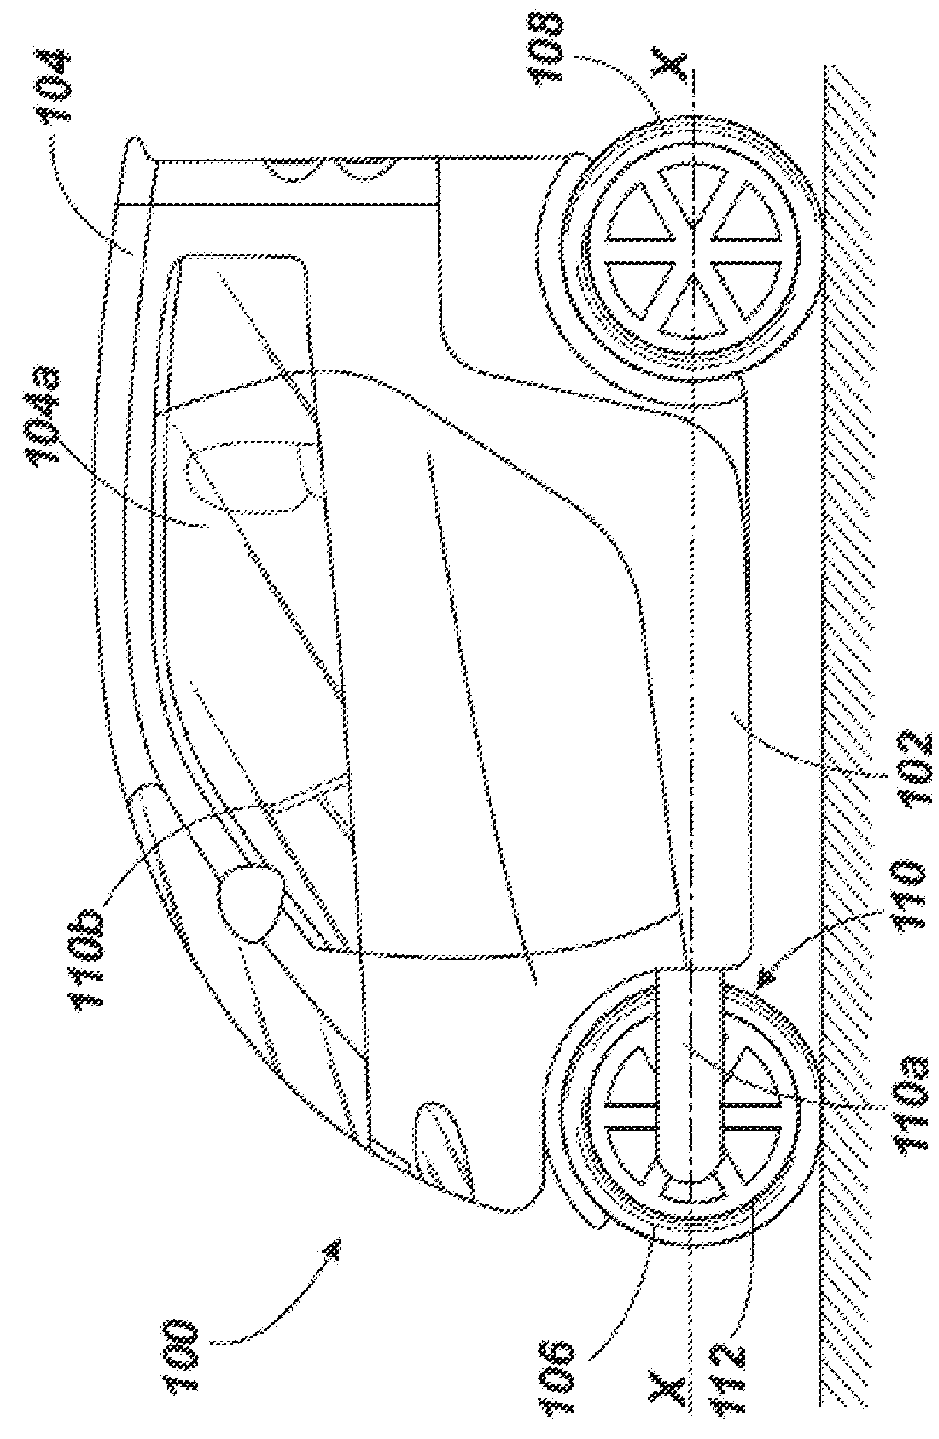 System and method for vehicle chassis control